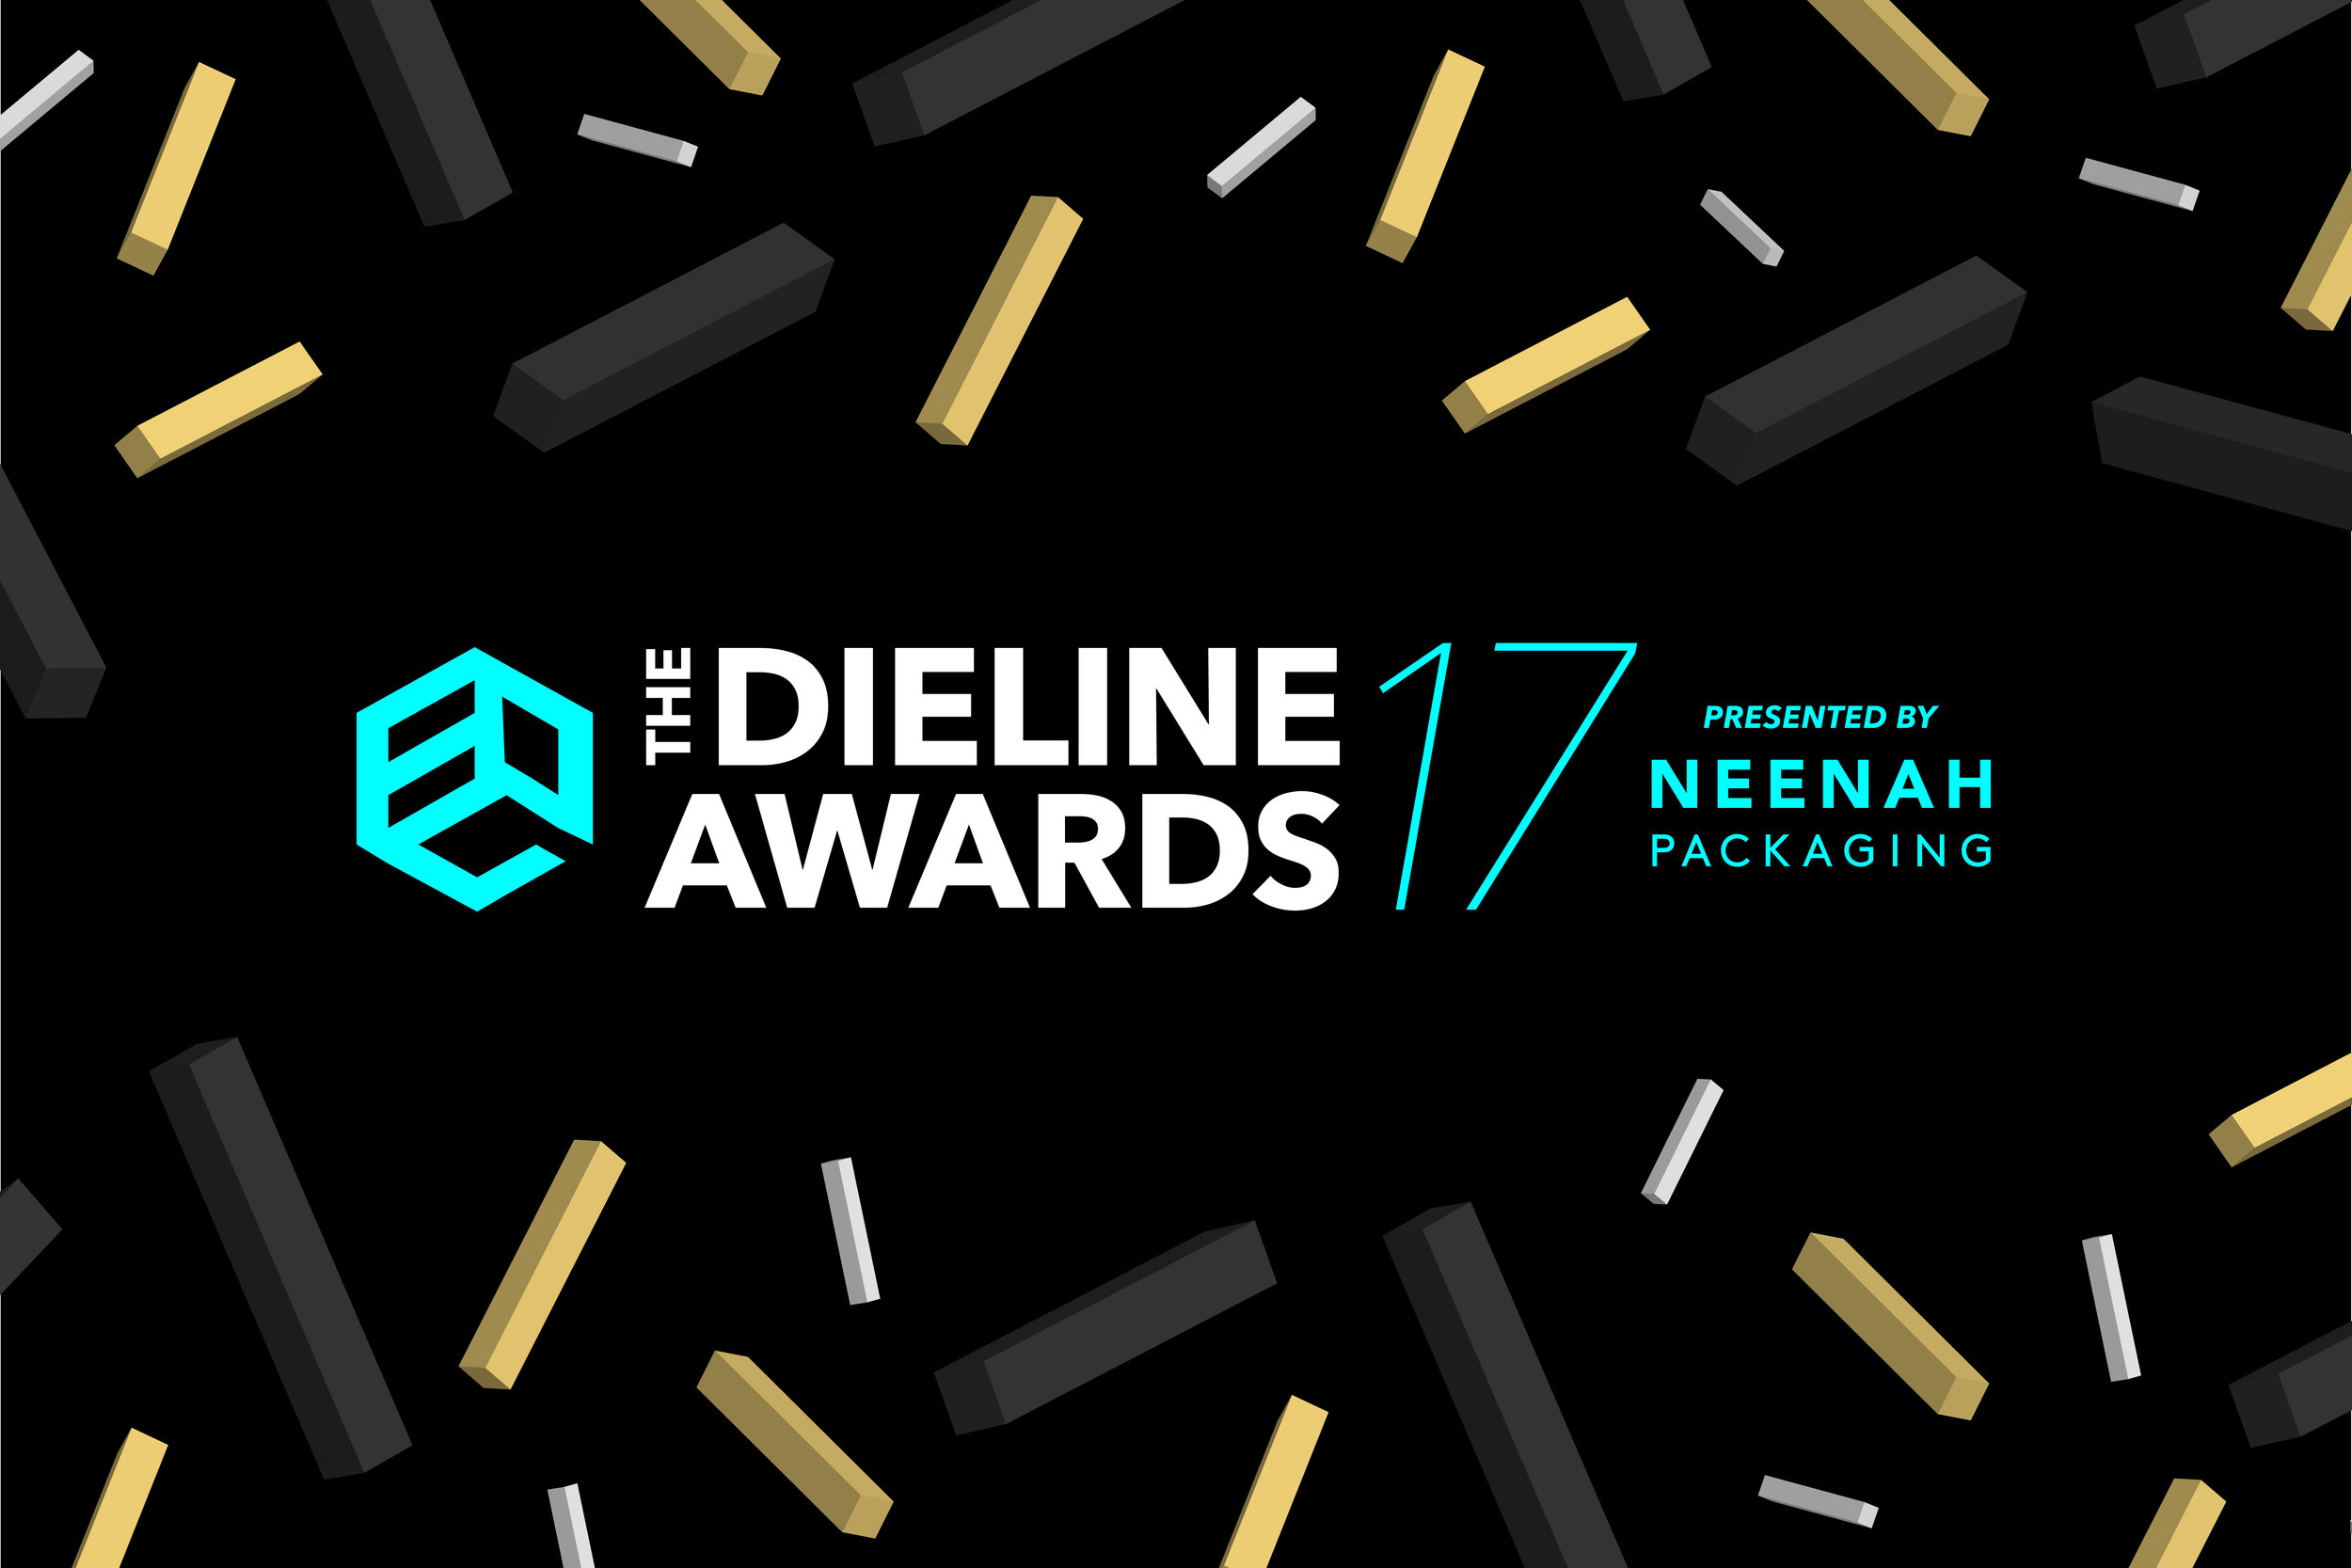 Announcing The Dieline Awards 2017 Winners: The Finest in Packaging Design